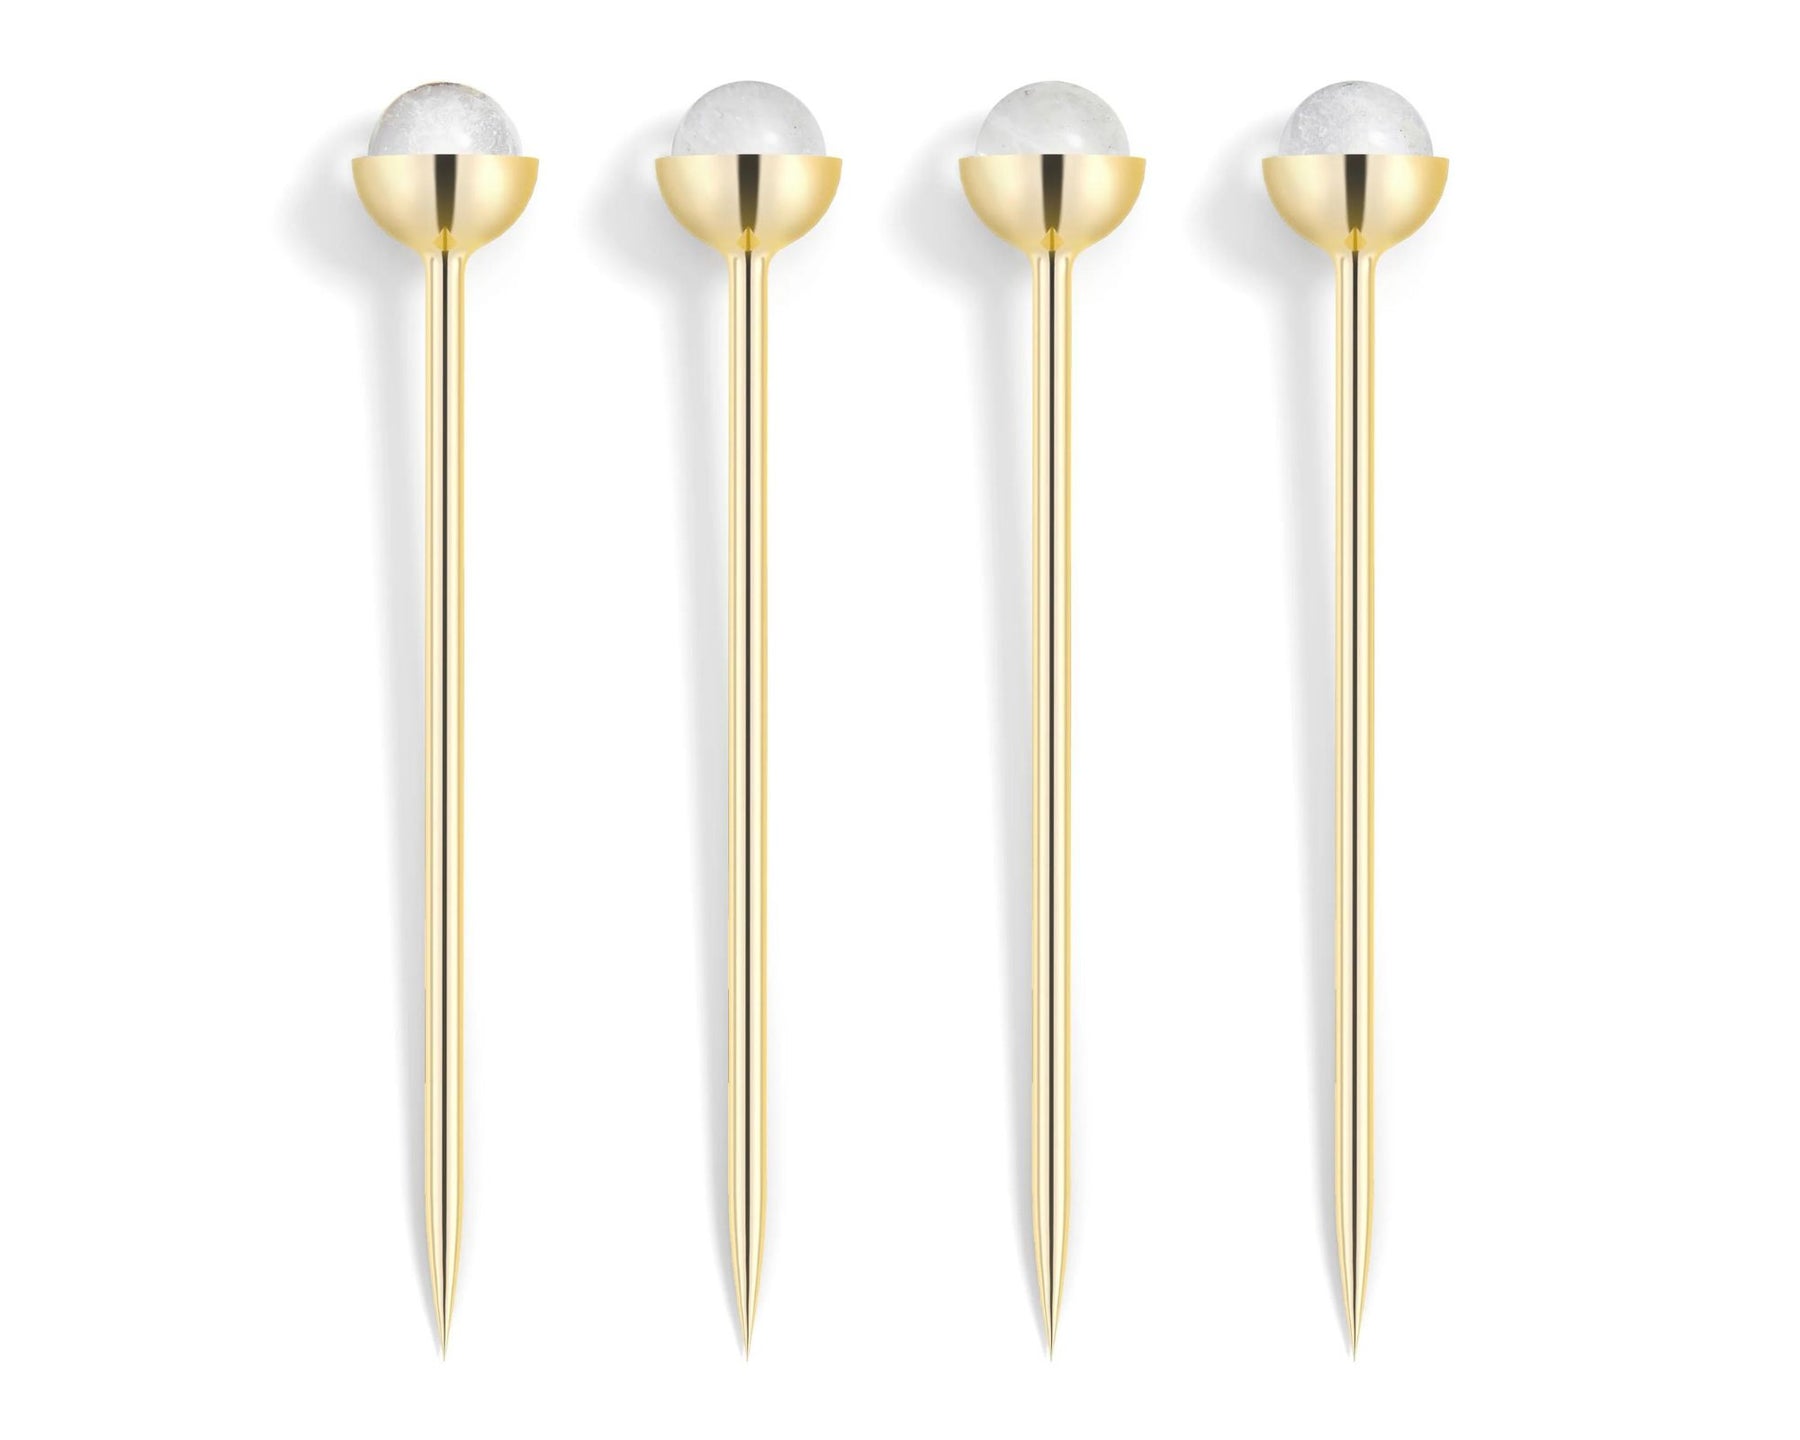 Hospitality Cocktail Picks in Gold & Crystal | DSHOP